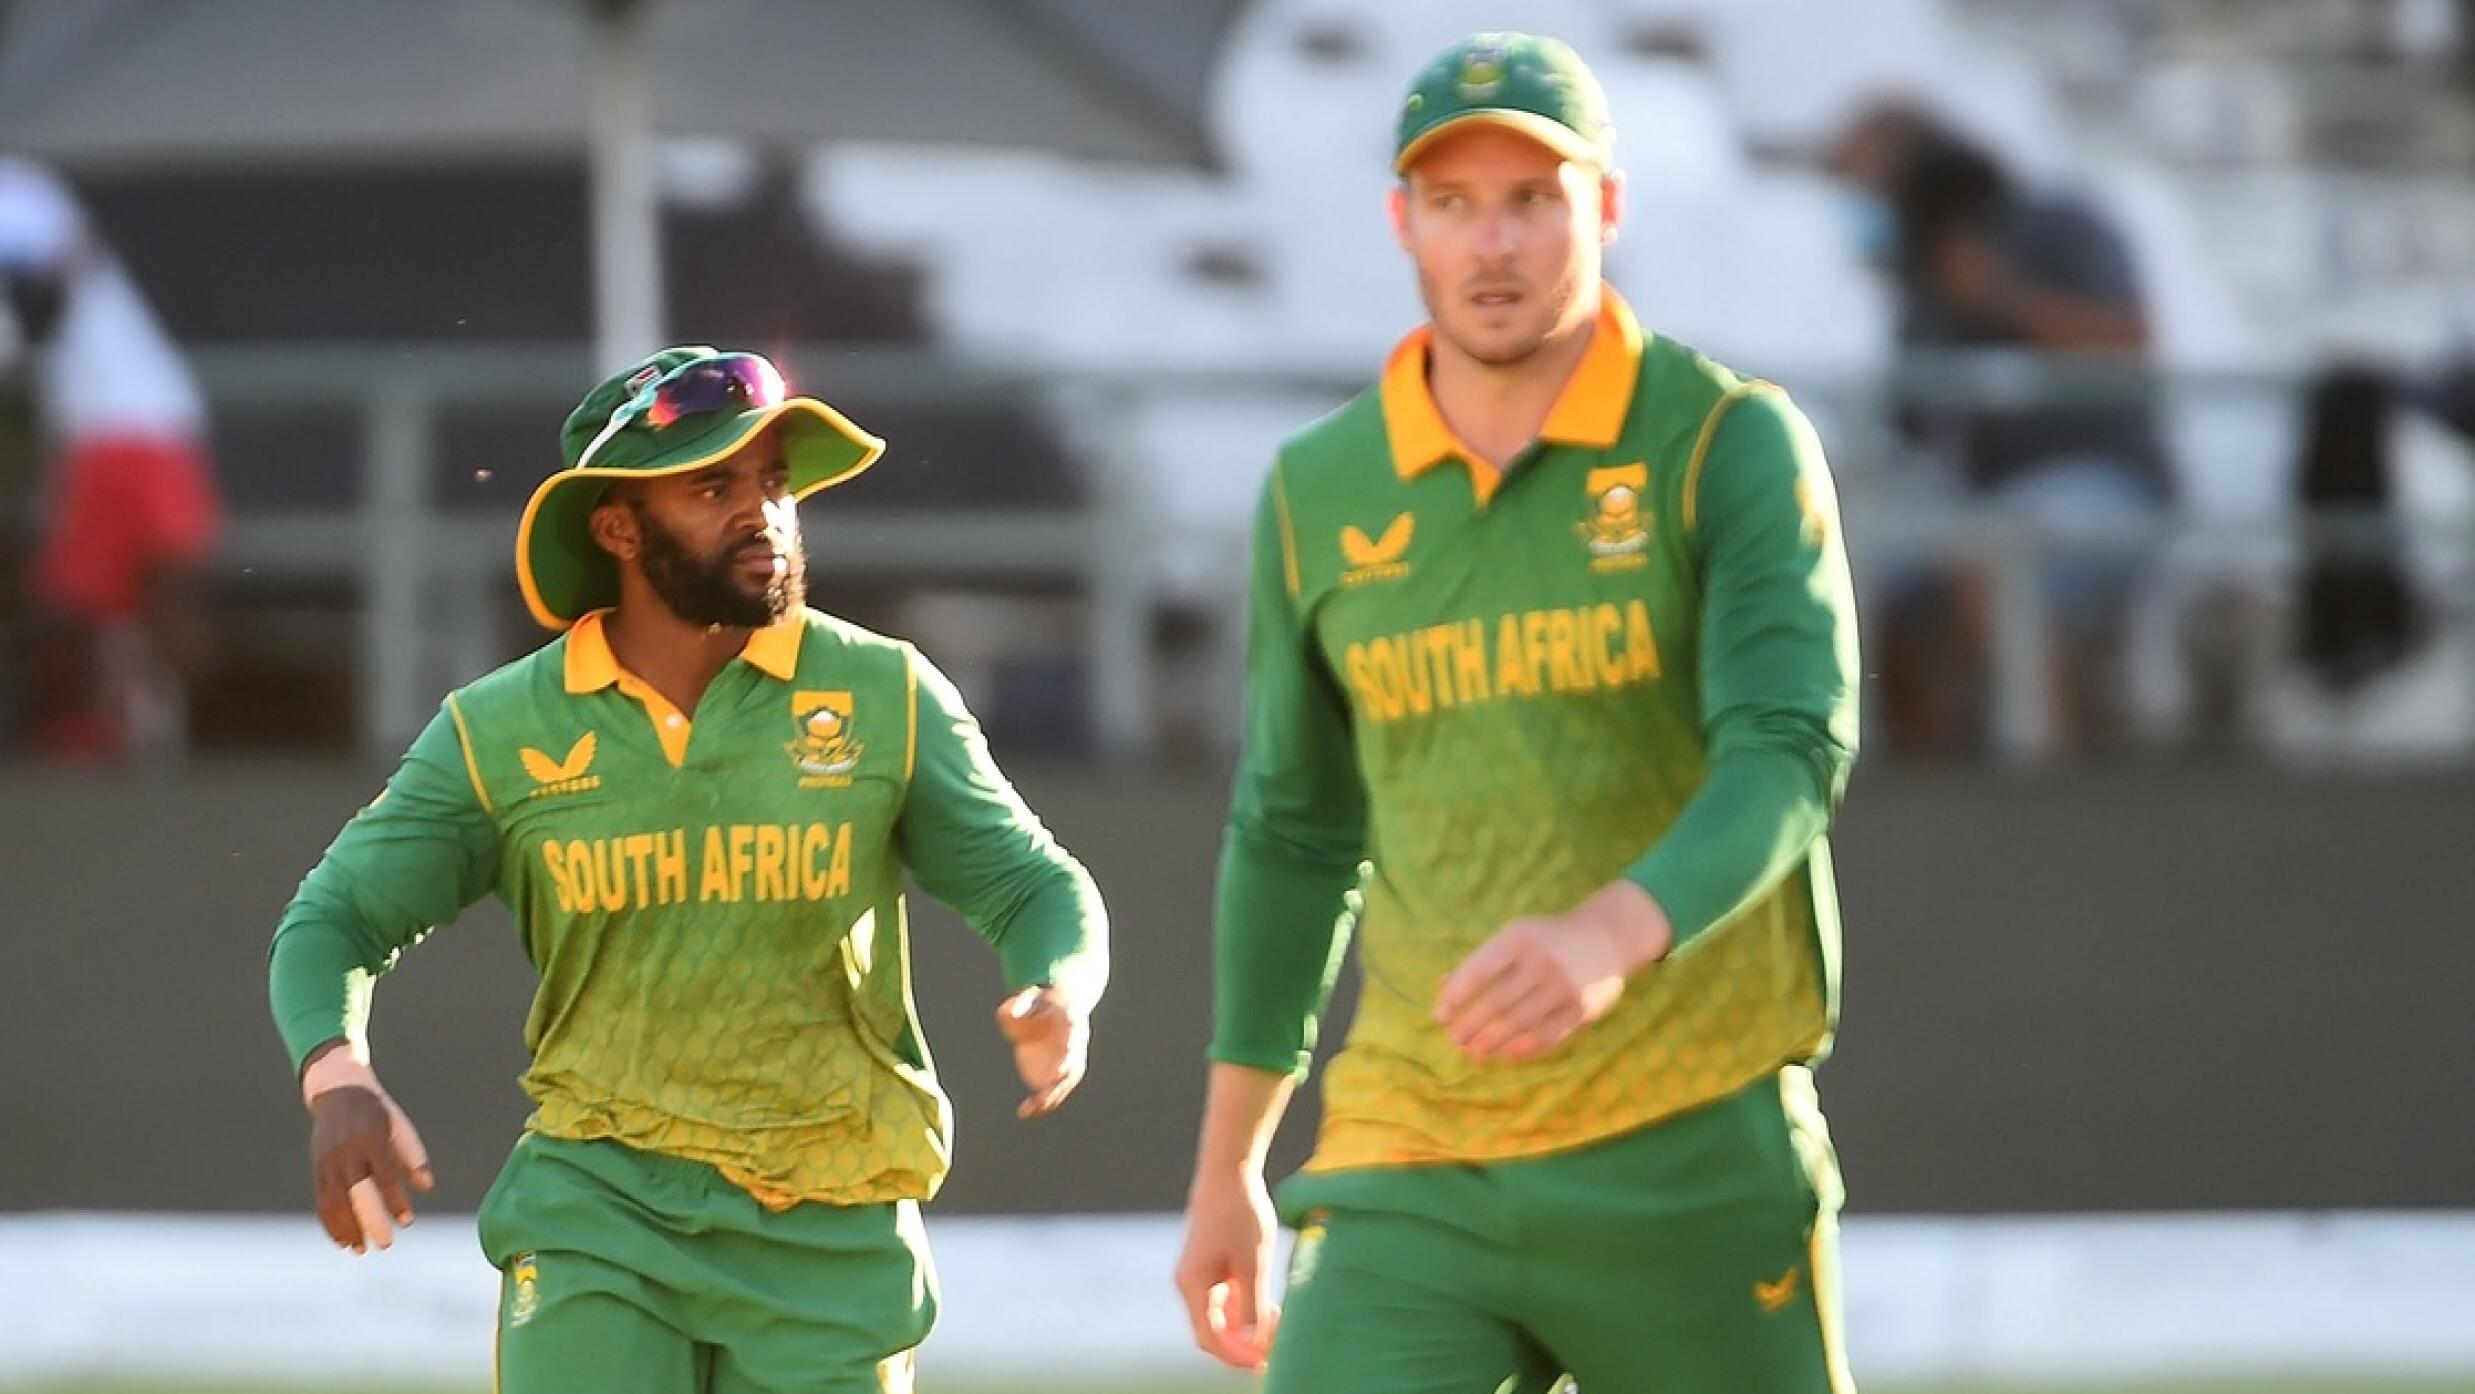 Andile Phehlukwayo (left), Temba Bavuma (centre) and David Miller (right) on the field for South Africa during a limited overs international match